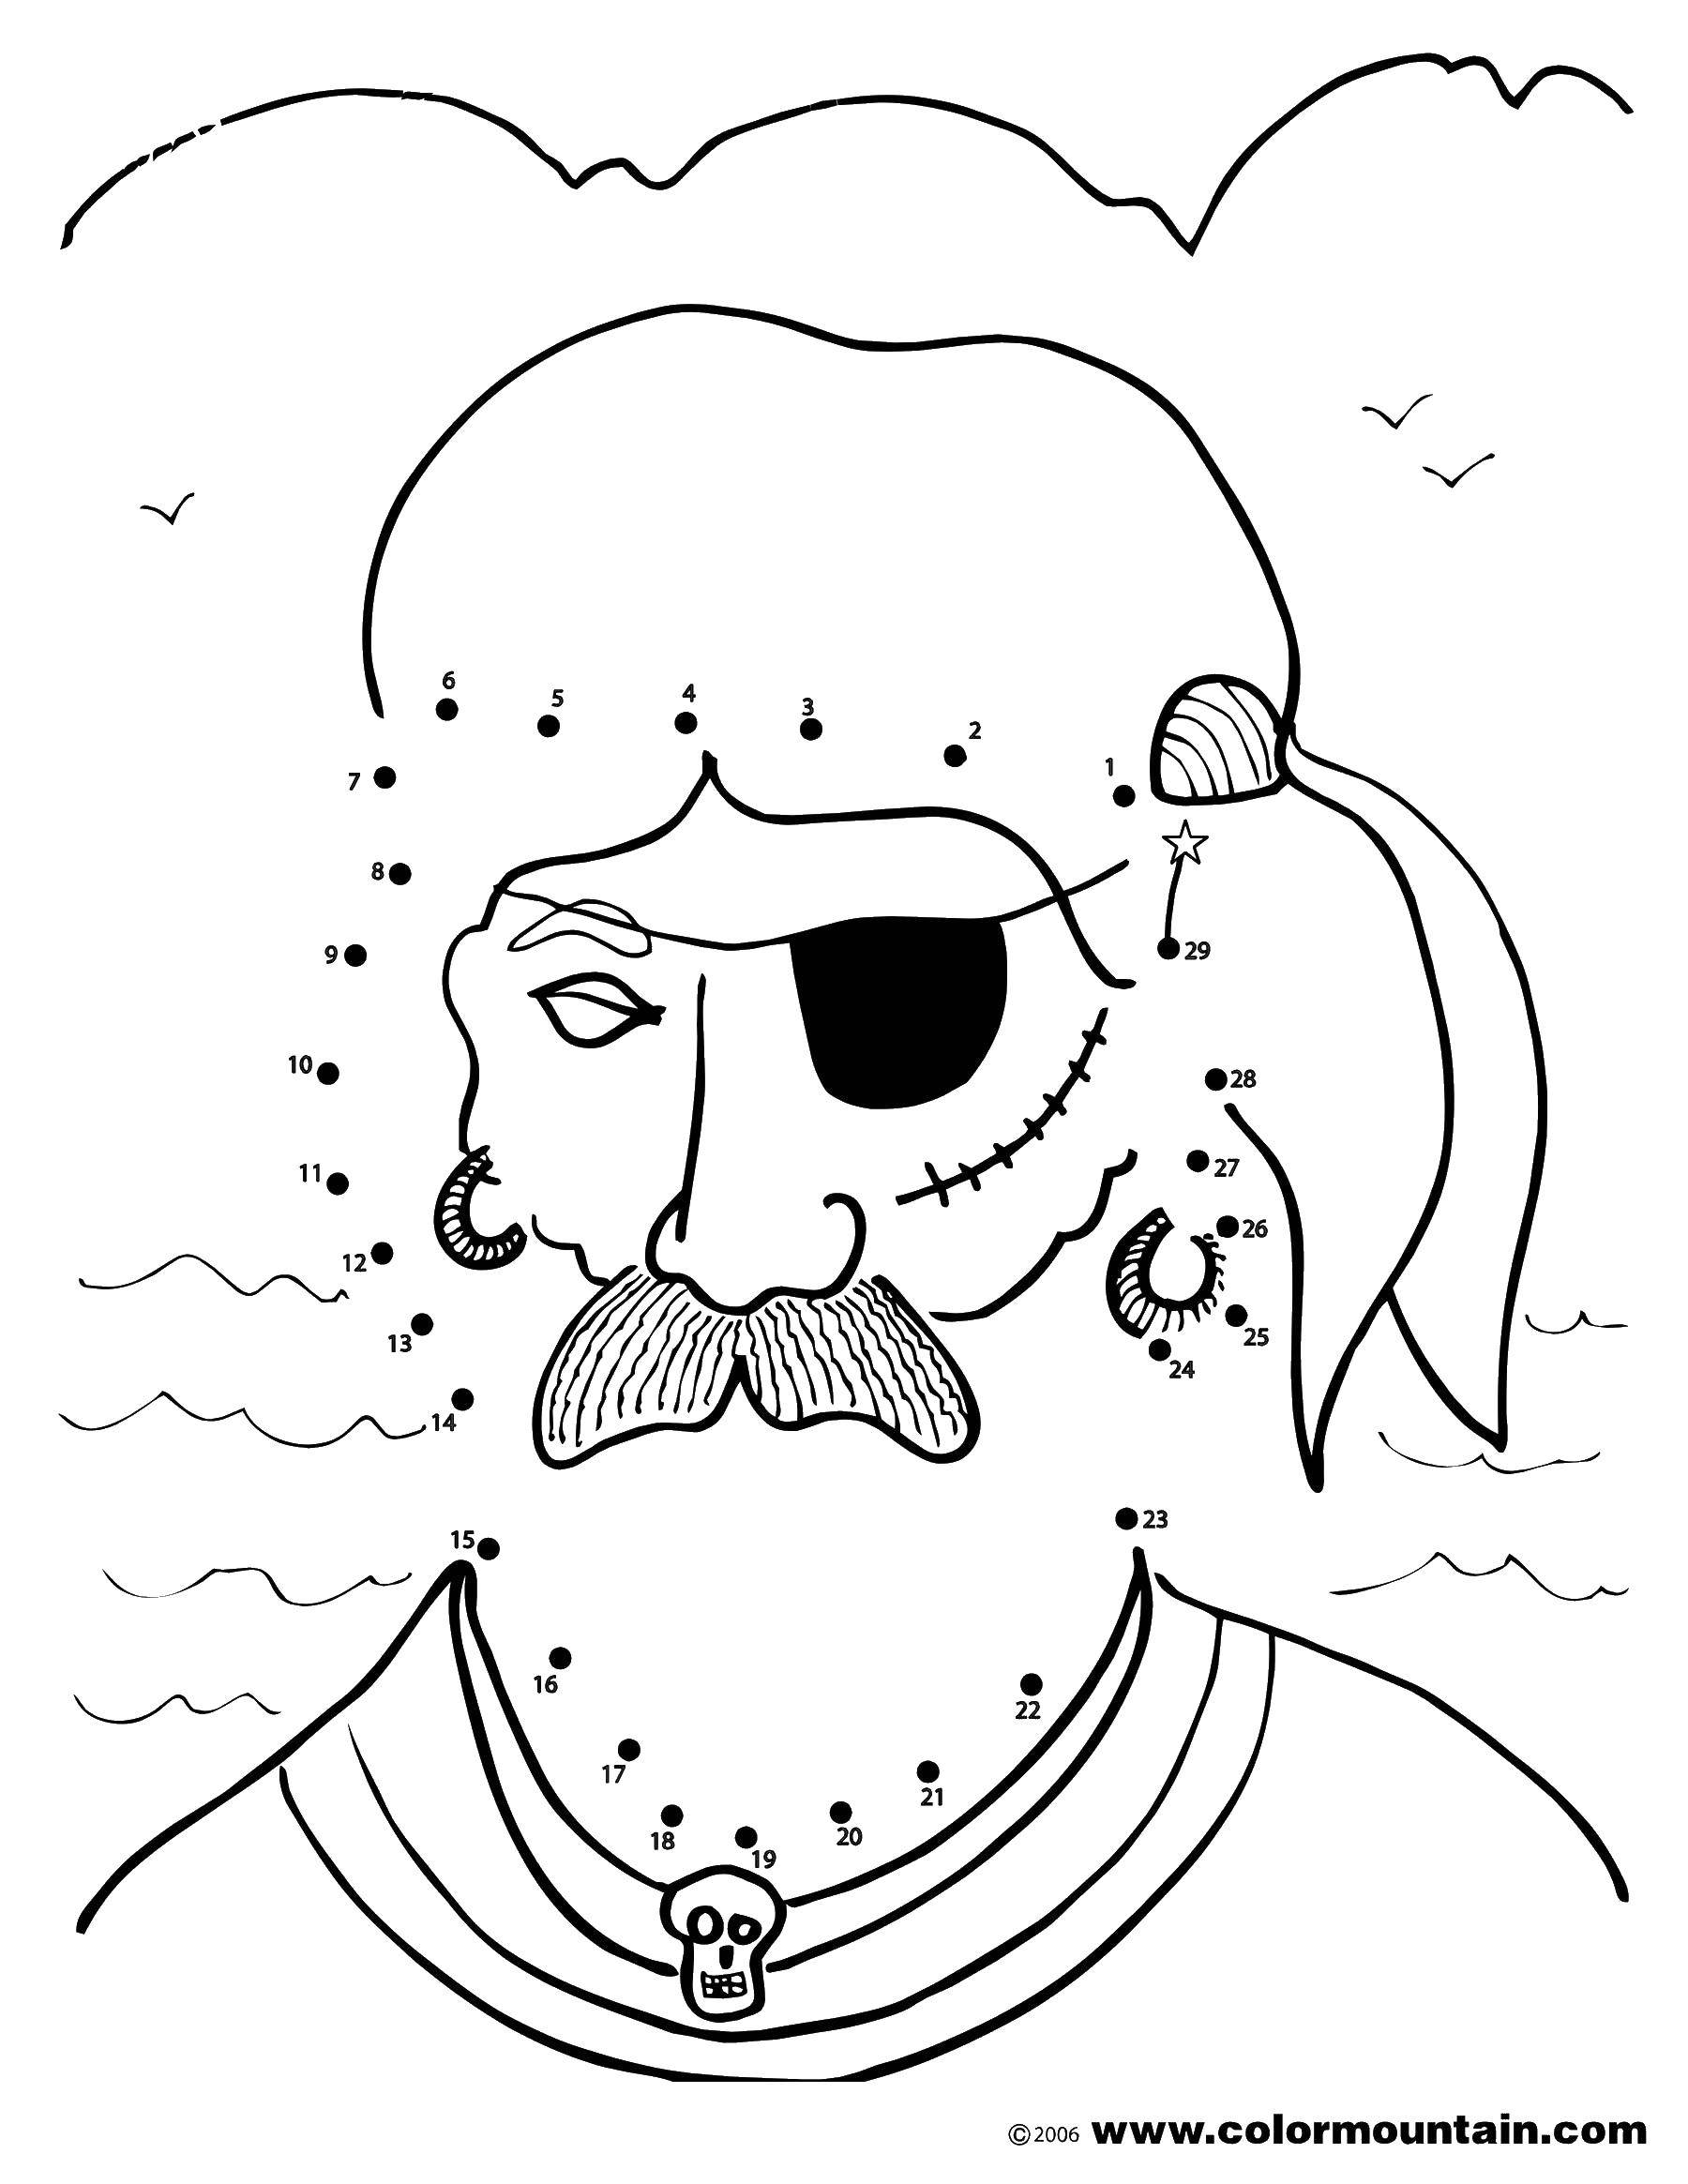 Coloring Pirate with a moustache. Category Draw points. Tags:  pirate, mustache, skull, earrings.